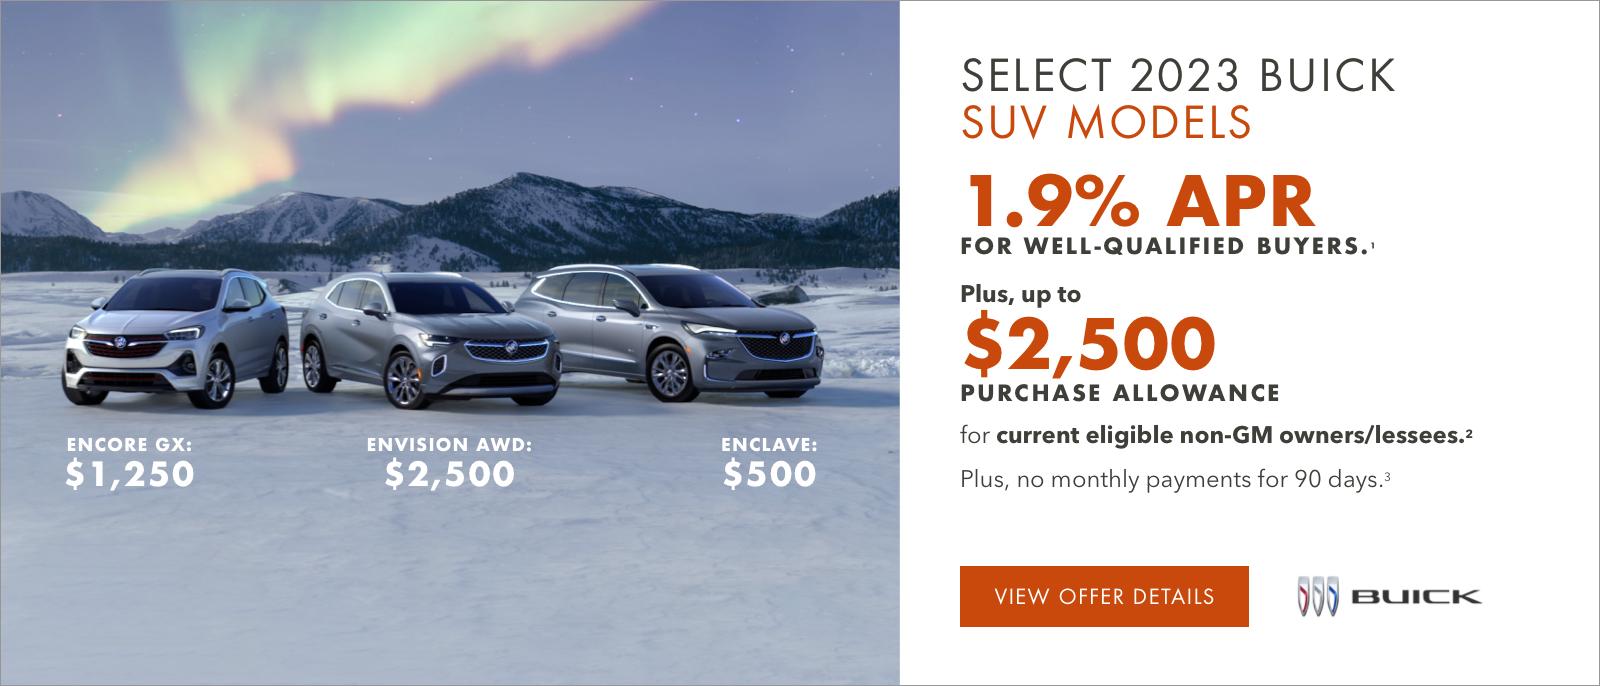 1.9% APR FOR WELL-QUALIFIED BUYERS.1

Plus, up to $2,500 PURCHASE ALLOWANCE for current eligible non-GM owners/lessees.2

PLUS, NO MONTHLY PAYMENTS FOR 90 DAYS.3